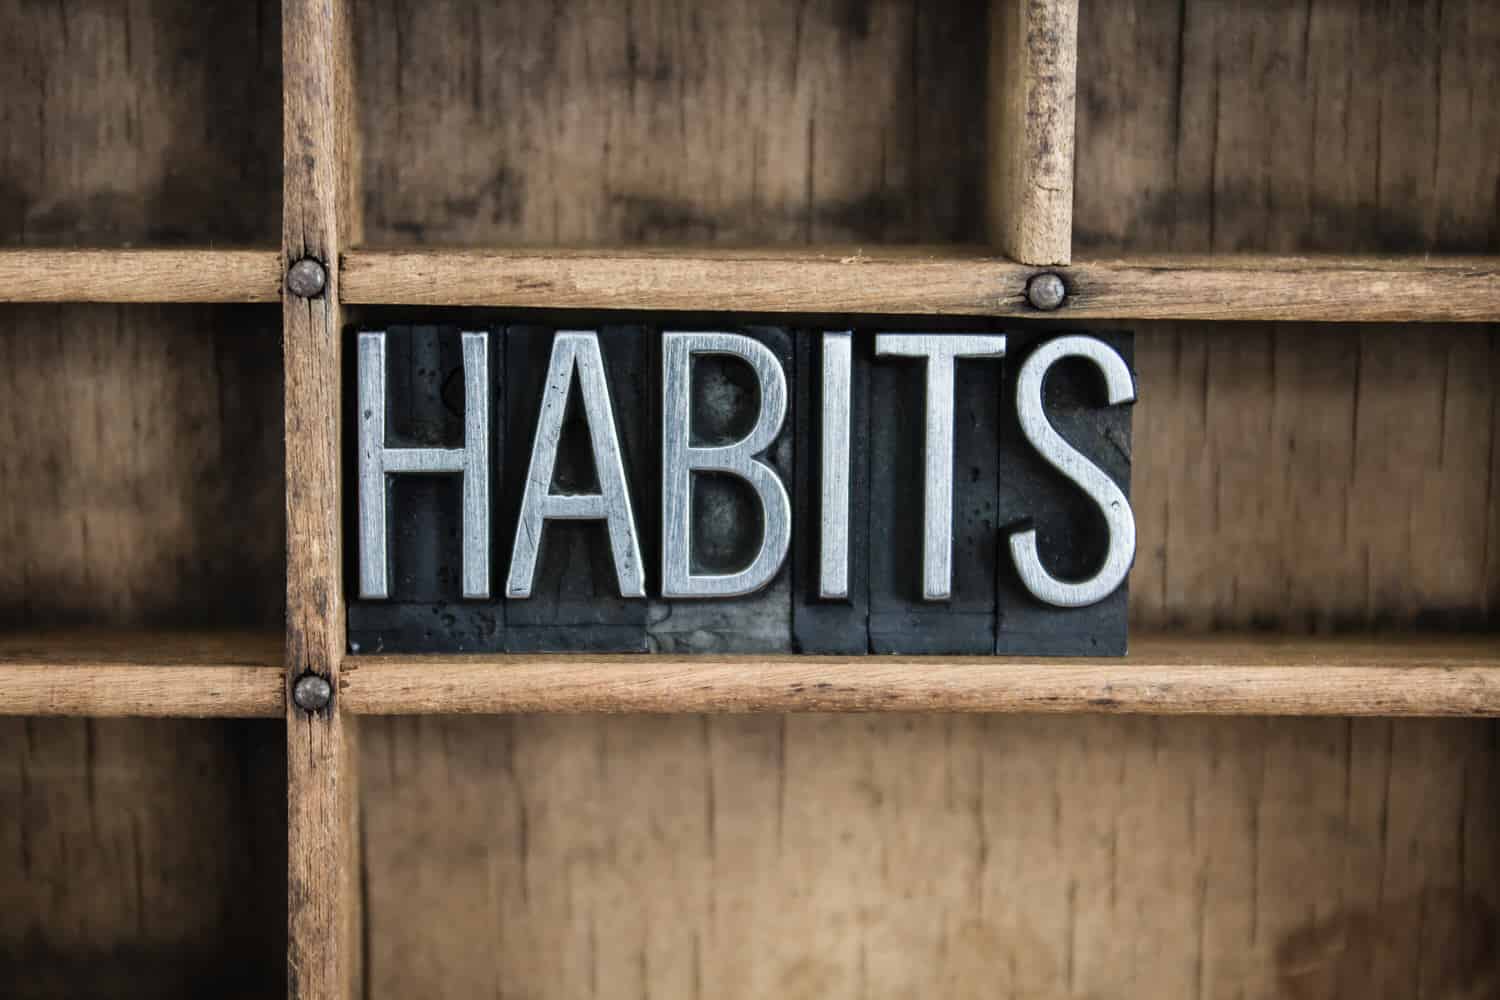 How Will You Build Habits?